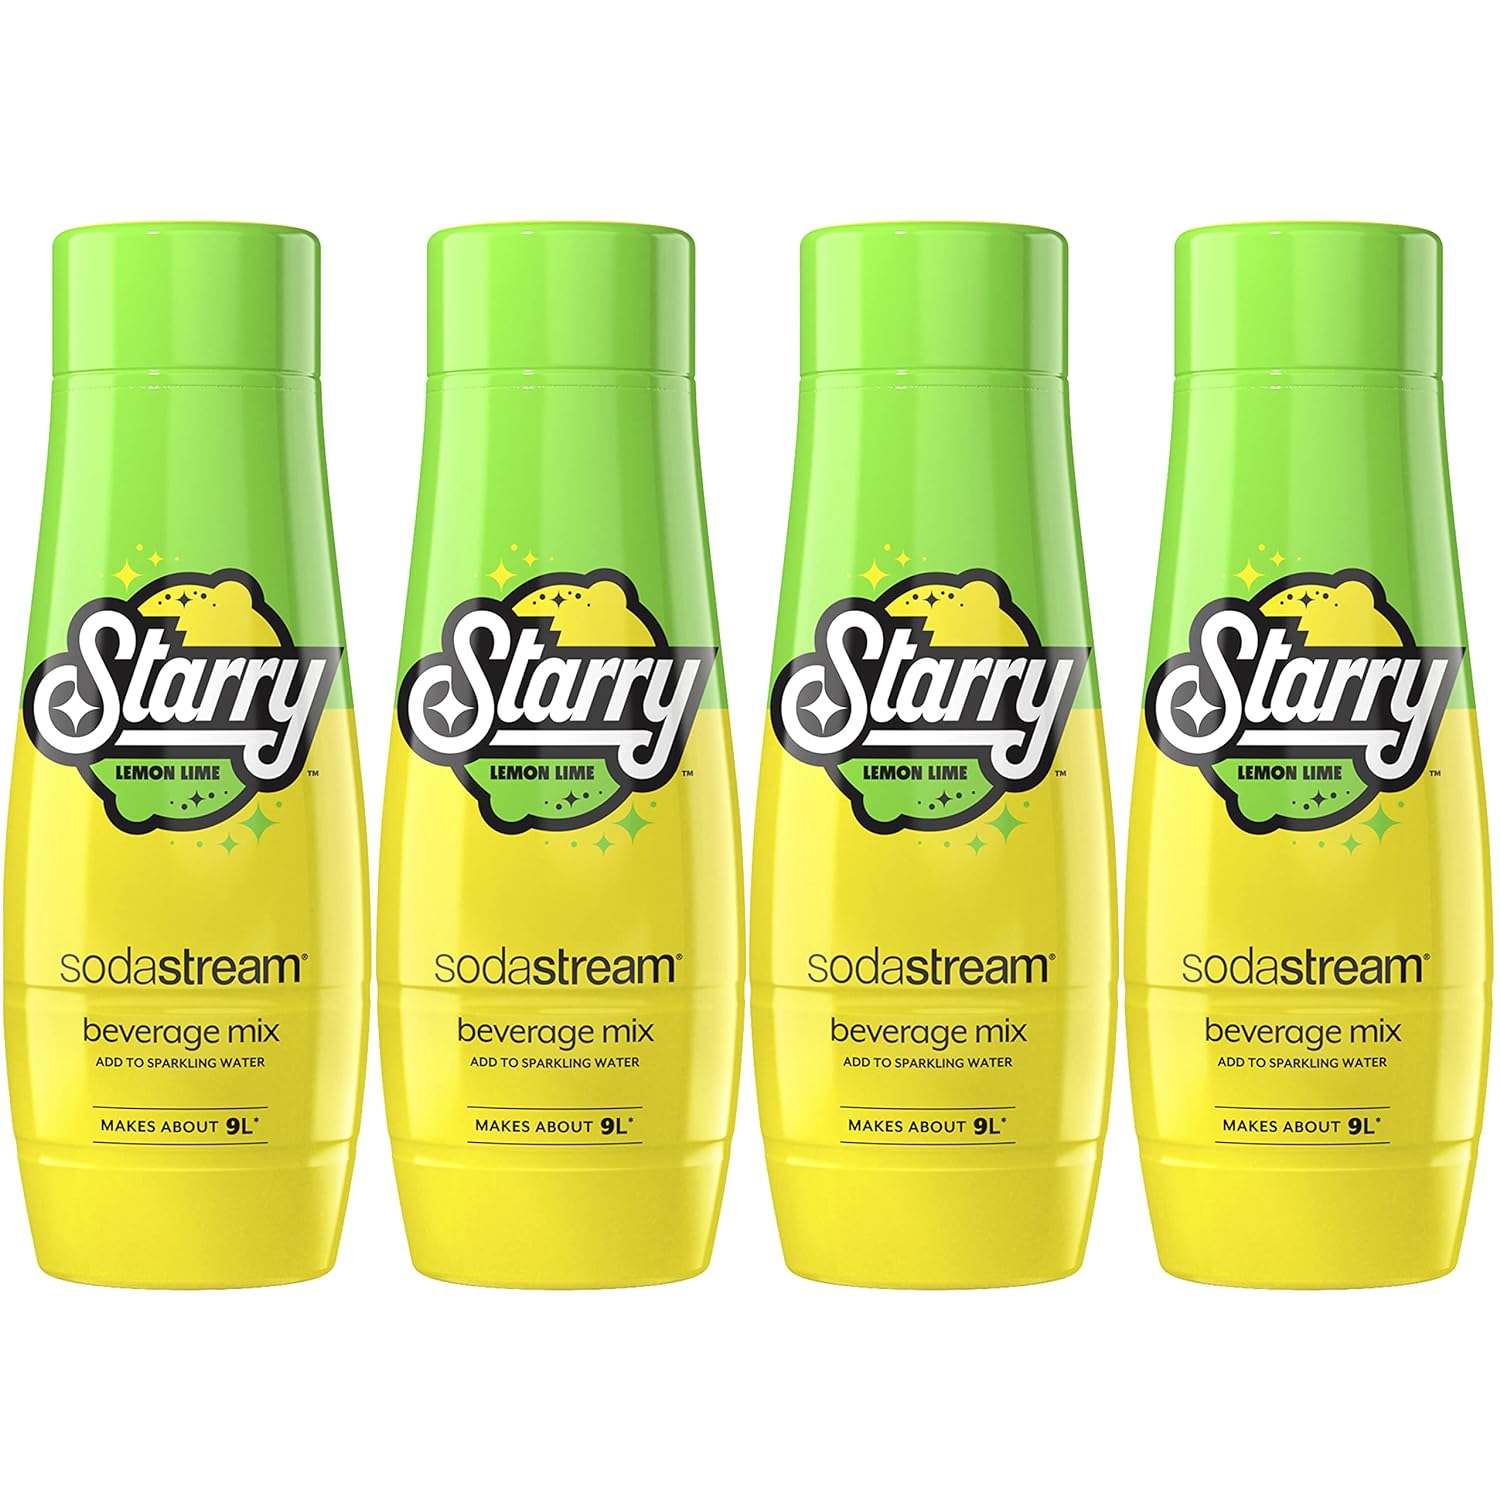 440ml SodaStream Beverage Mix (Starry): 4-Pack $11.48 or 6-Pack $15.75 w/ S&S + Free S&H w/ Prime or $35+